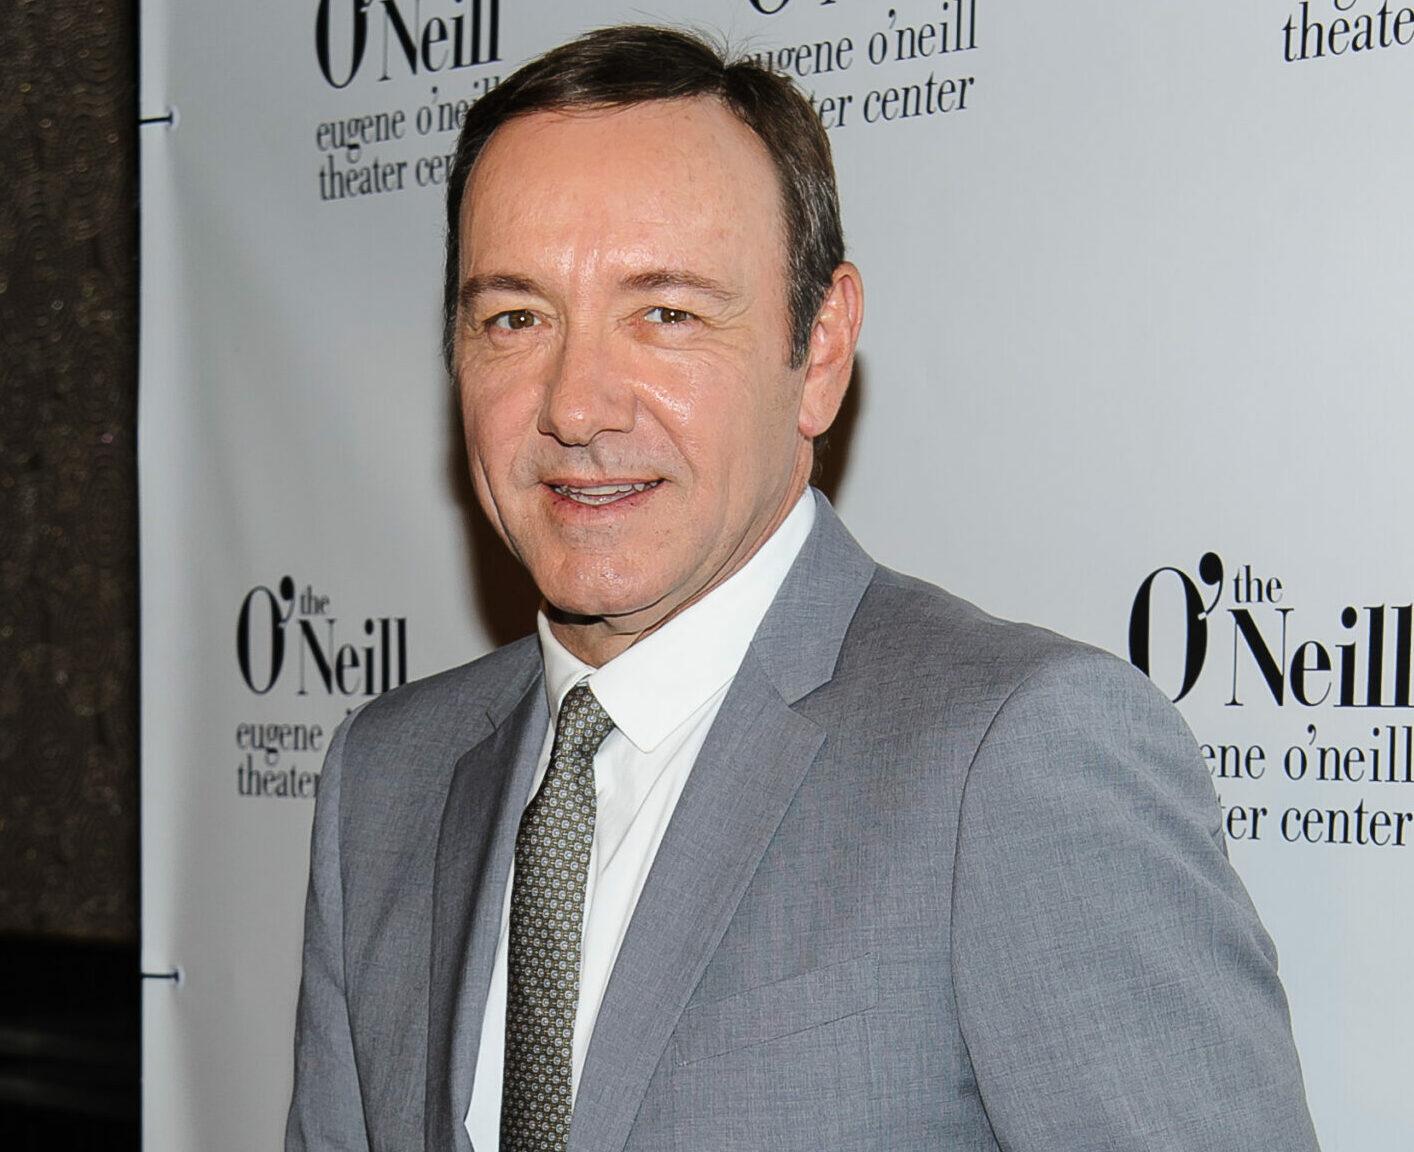 The O'Neill Center's Monte Cristo Award Featuring: Kevin Spacey